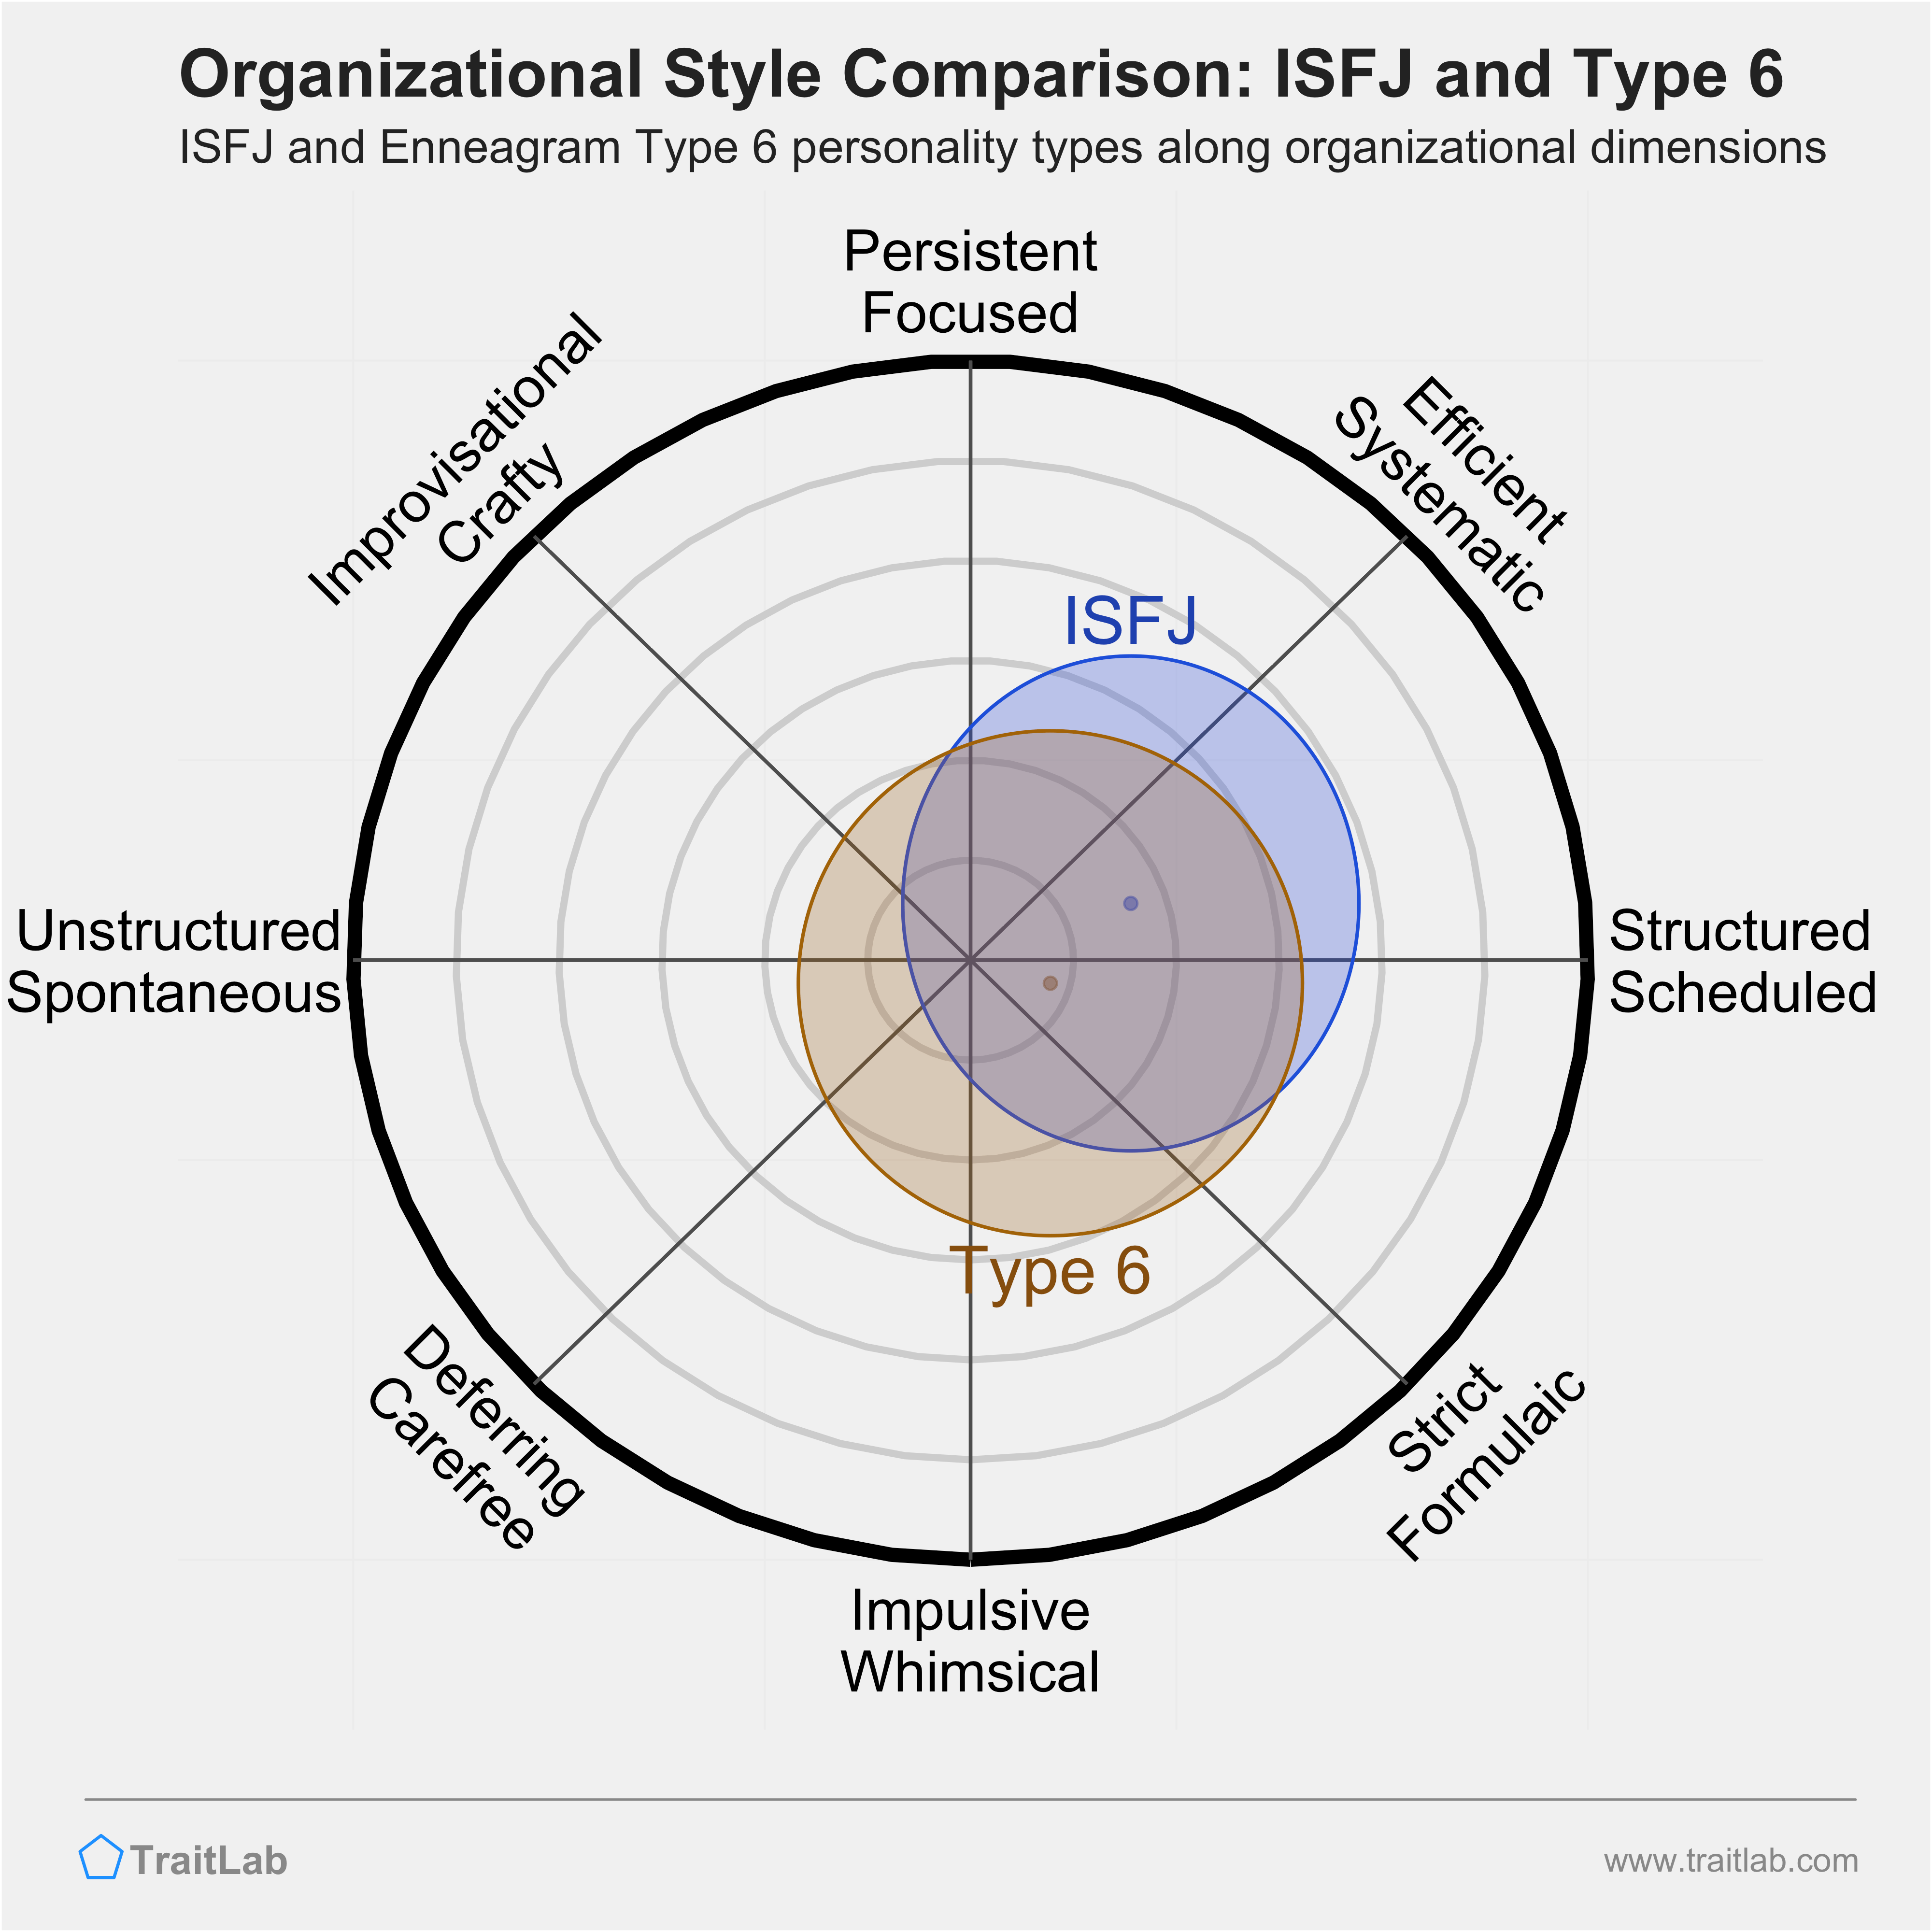 ISFJ and Type 6 comparison across organizational dimensions